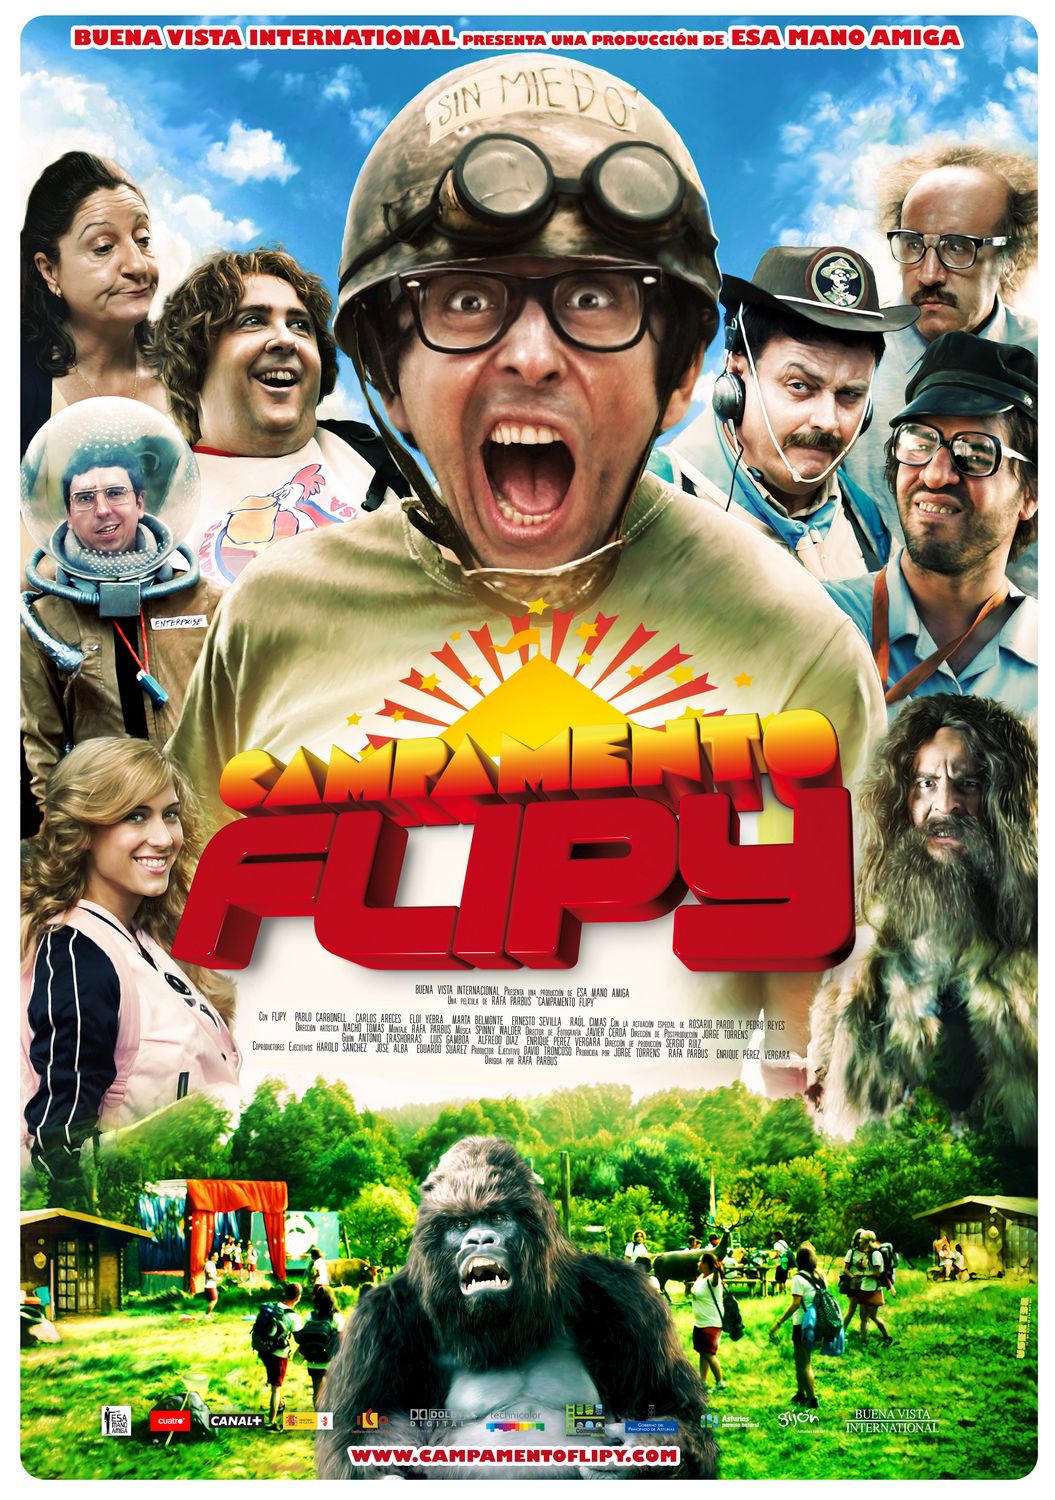 Extra Large Movie Poster Image for Campamento Flipy (#2 of 2)